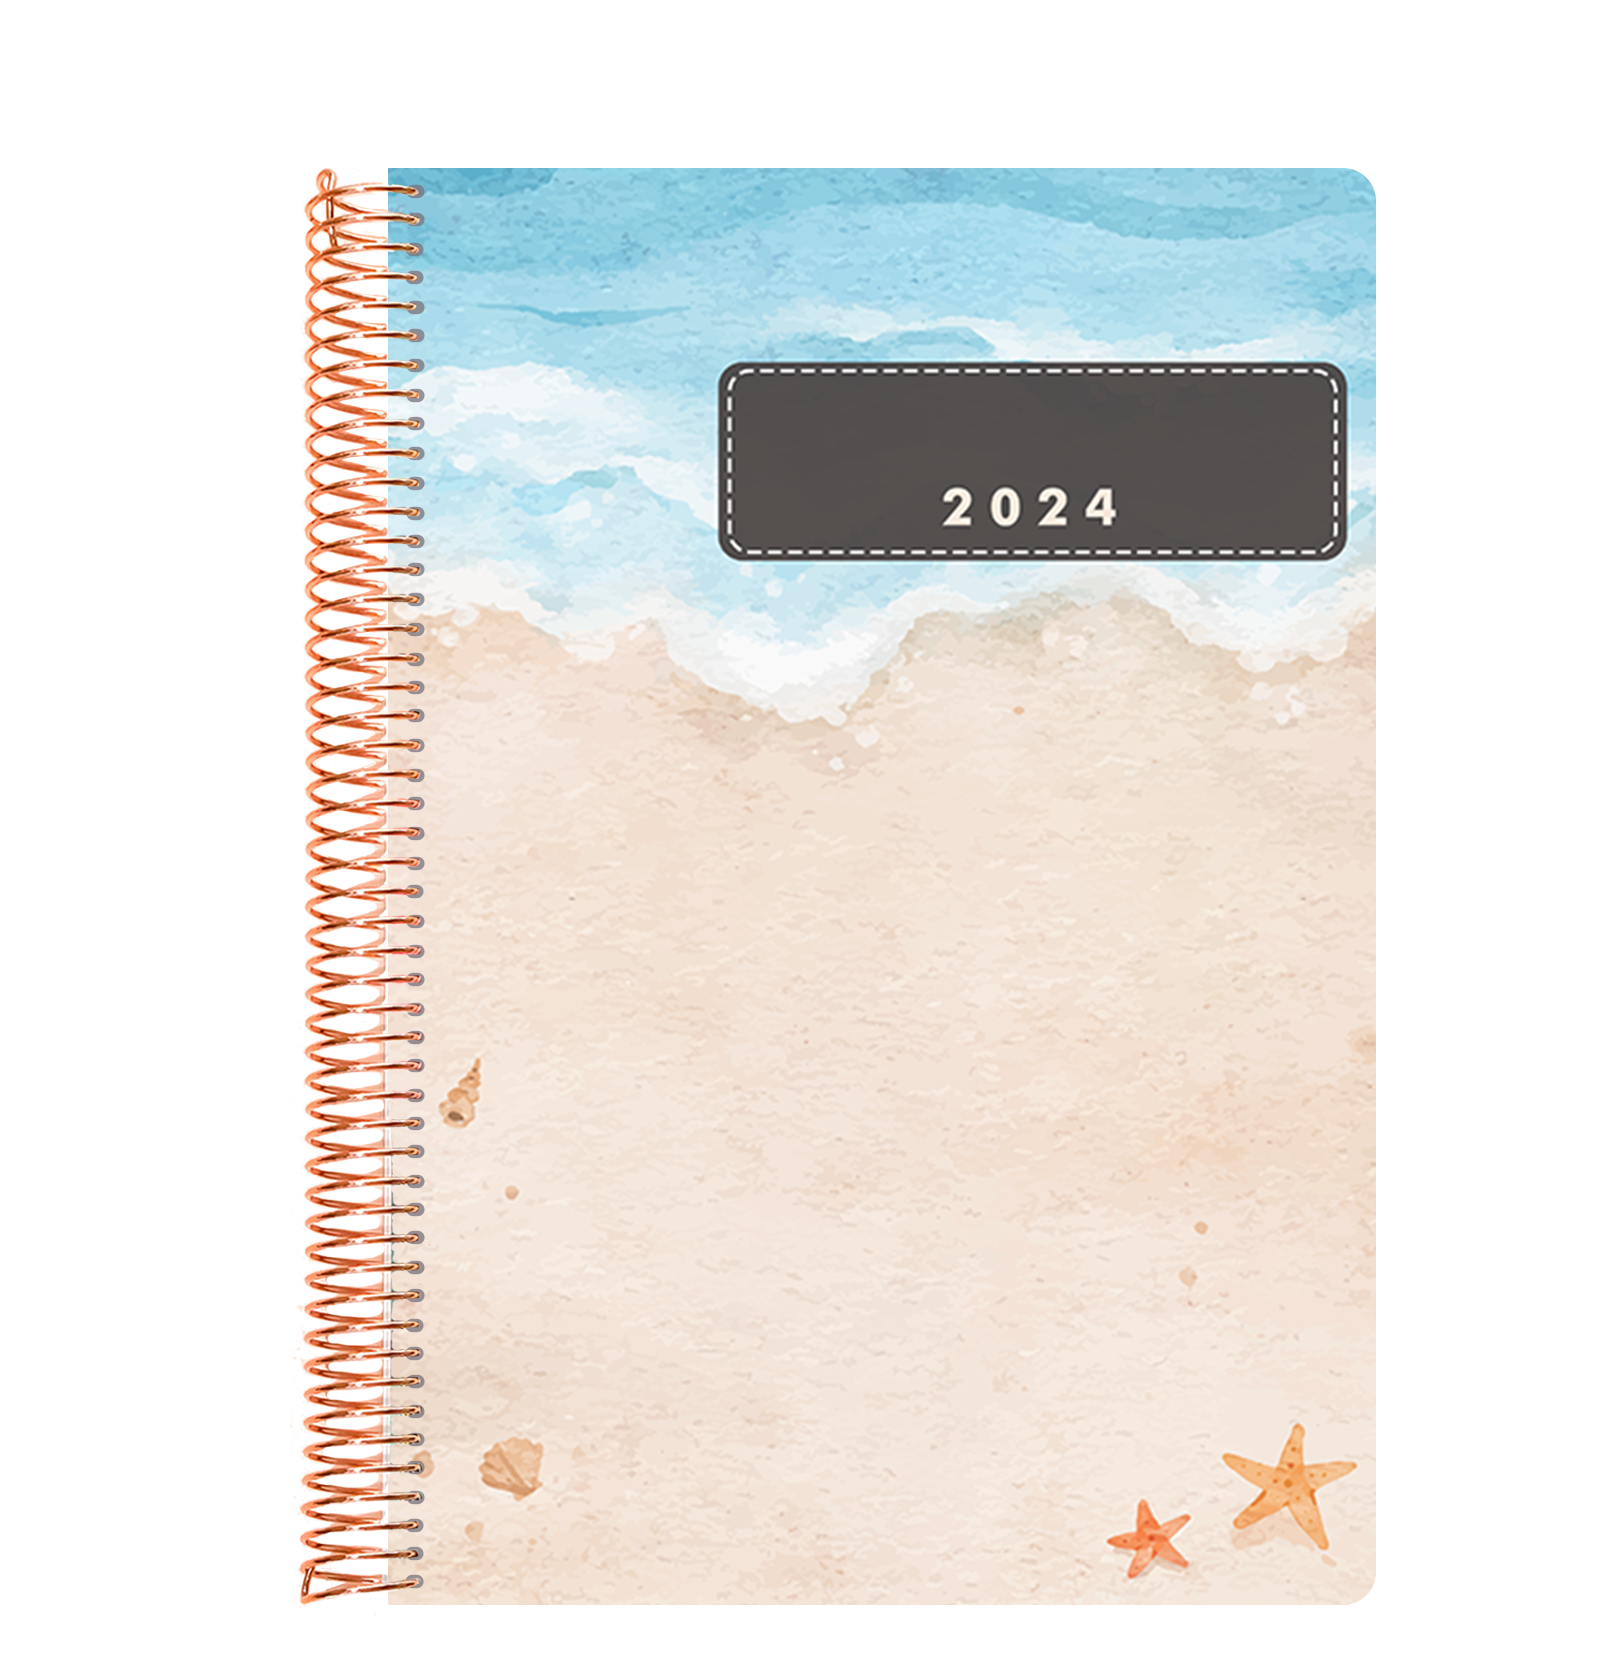 Assessment Planner - By The Sea